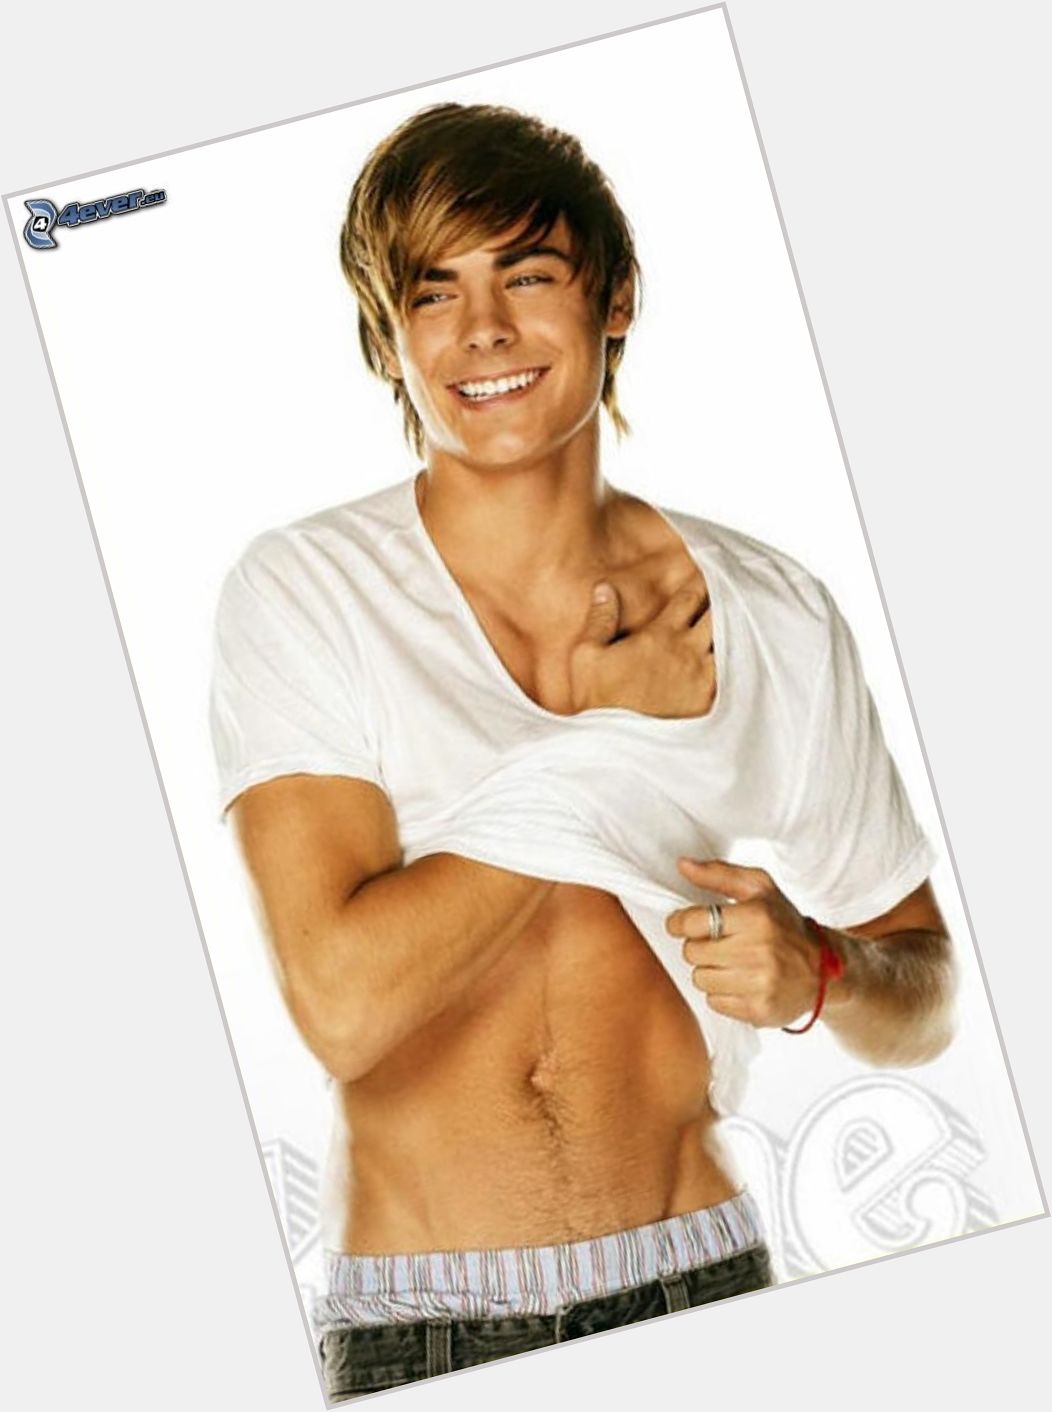 <a href="/hot-men/troy-bolton/is-he-and-gabriella-montez-married-high-school">Troy Bolton</a> Athletic body,  light brown hair & hairstyles